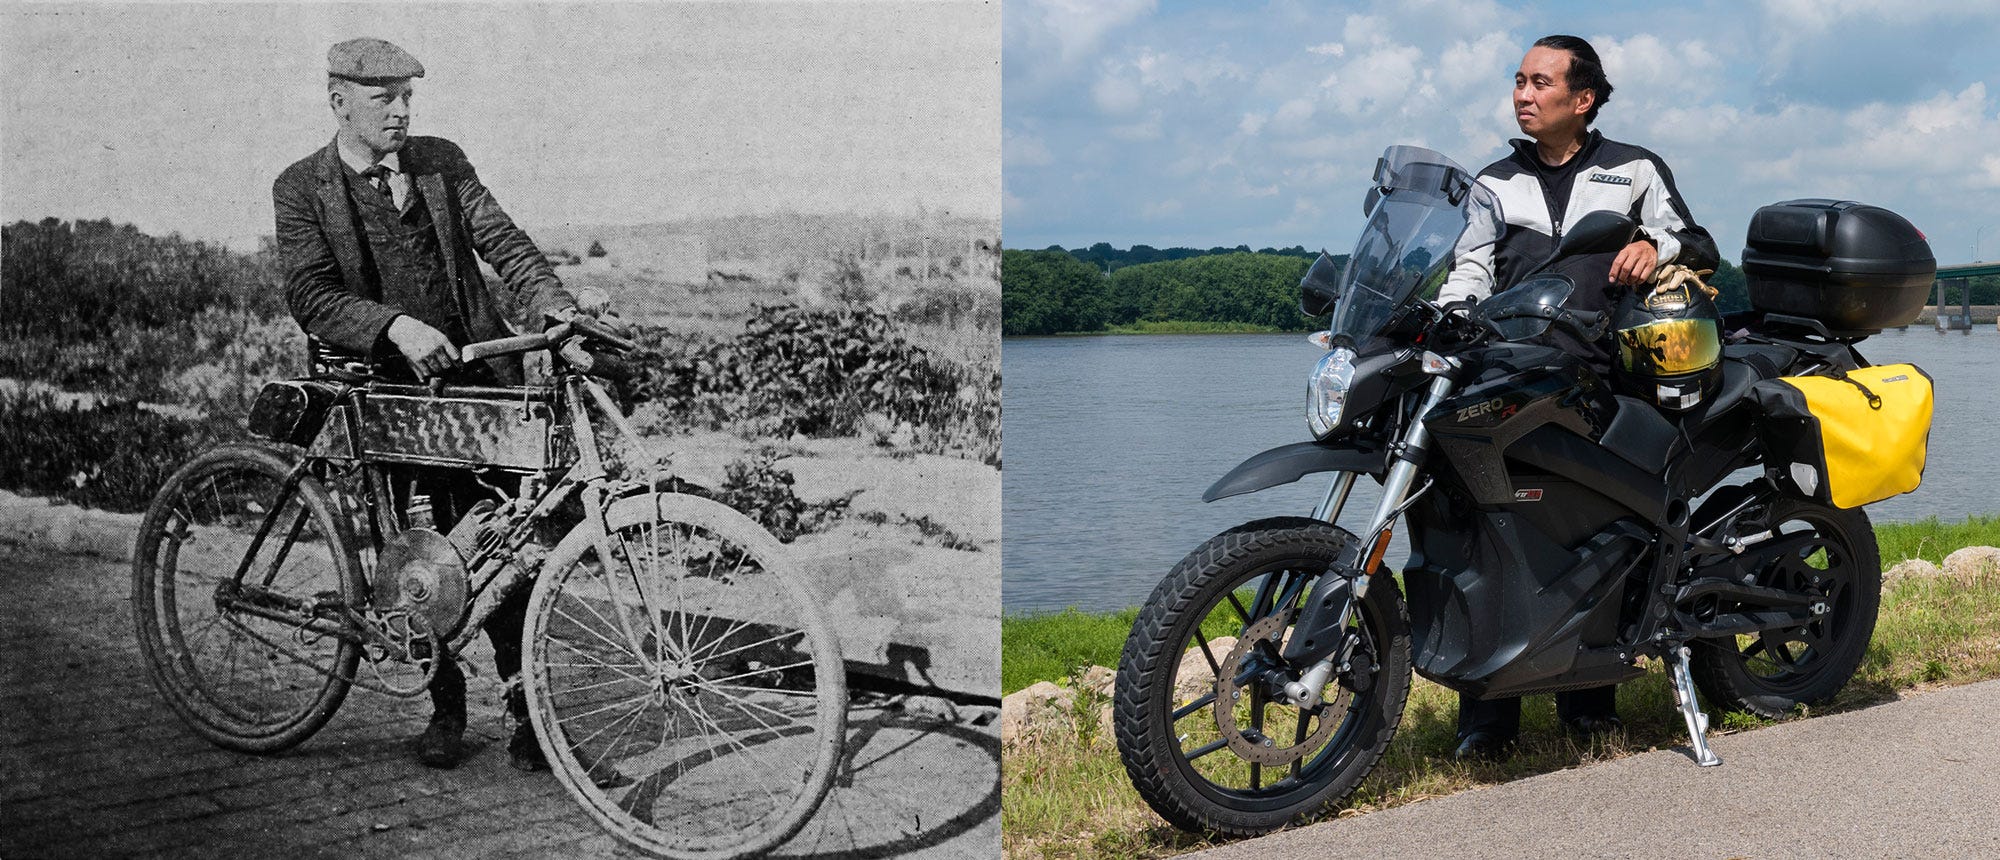 Two photos. On the left, a black and white photo from 1903 of George A Wyman and his California motor bicycle. The motor bicycle is pointed to the lower right. Wyman stands to the left of the bike, his left hand holding the left handlebar and his right forearm resting on the seat. He is dressed in a jacket, vest, tie, and cap and looking intently into the distance. His motor bicycle looks like a bicycle with a motor attached to it; there are still pedals and a crank and chain to start the bike. A small motor has been placed just above the pedals, and above that is a hand hammered fuel tank. The second photo is on the right and a mirror image of the first, but it is a man with a modern, electric motorcycle. He is striking a similar pose to the first photo. The second photo is color. The motorcycle has yellow saddlebags and a topcase. The man is wearing modern motorcycle safety gear, including a full face helmet with that is place on the seat. The man's forearm is resting on top of the helmet.